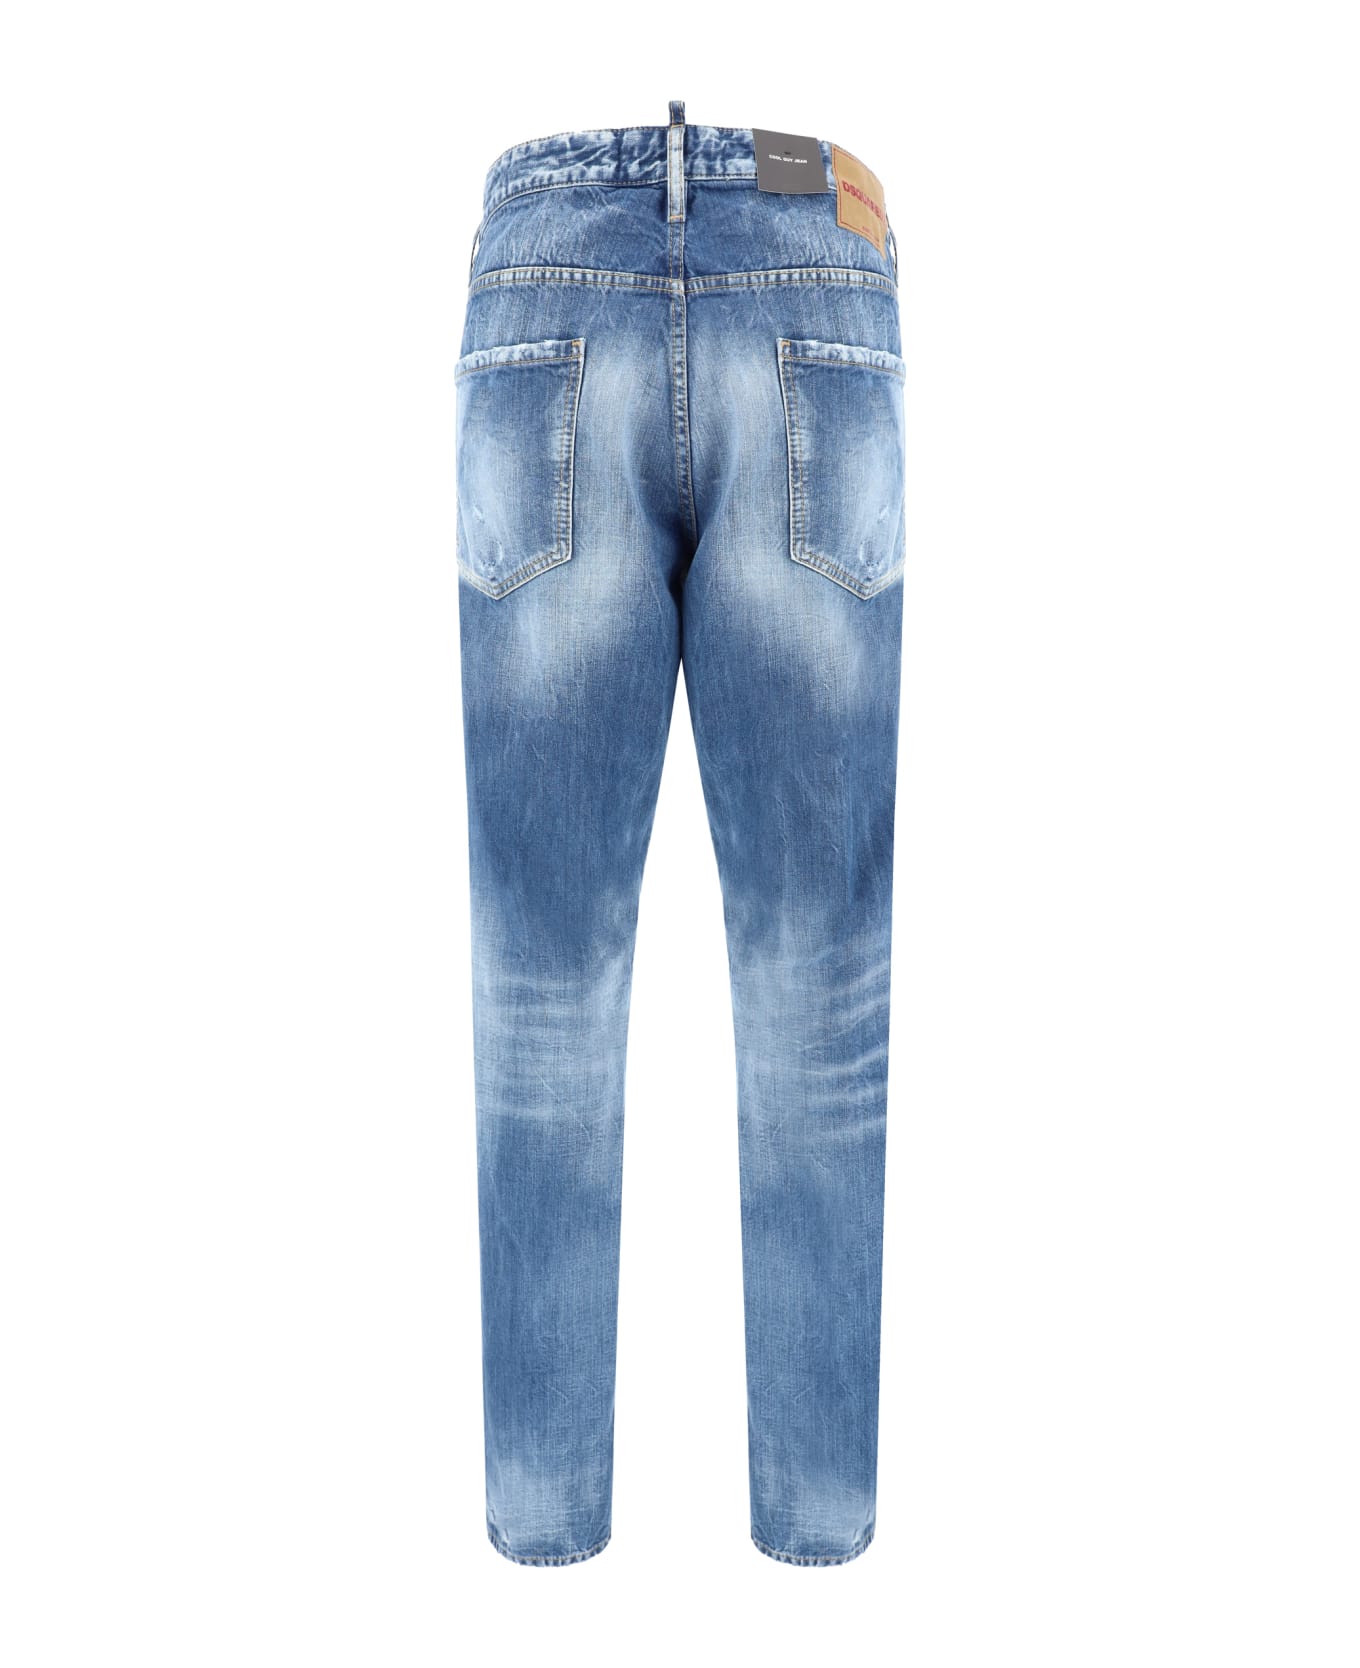 Dsquared2 Cool Guy Jeans - Navy Blue デニム